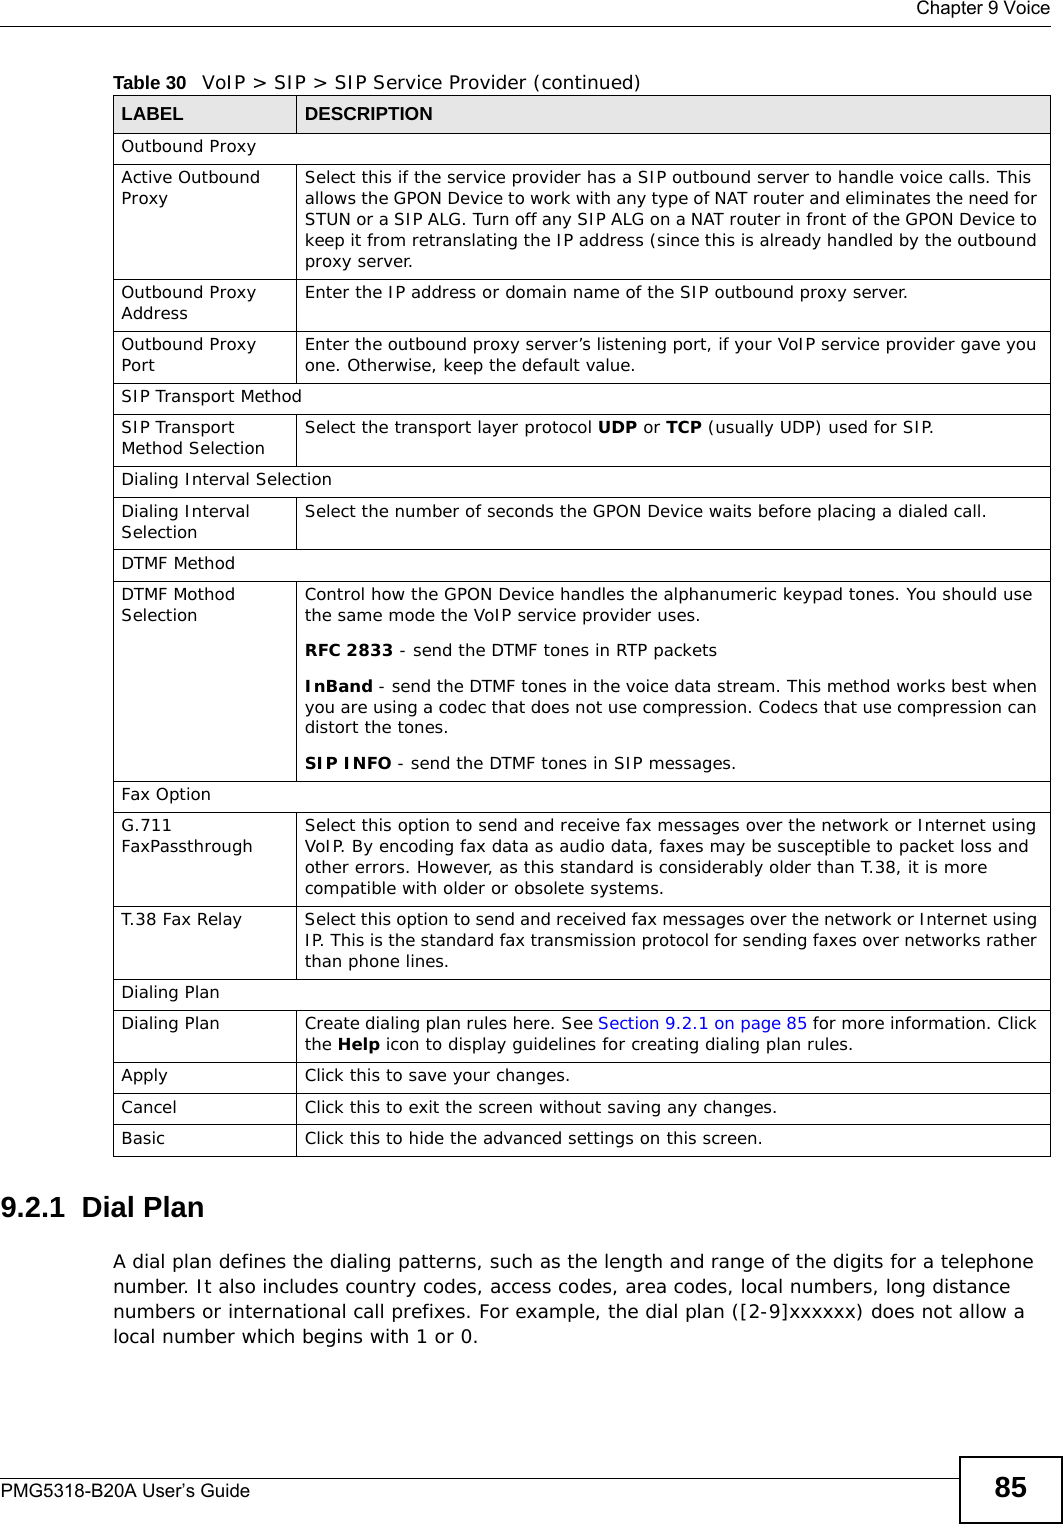  Chapter 9 VoicePMG5318-B20A User’s Guide 859.2.1  Dial PlanA dial plan defines the dialing patterns, such as the length and range of the digits for a telephone number. It also includes country codes, access codes, area codes, local numbers, long distance numbers or international call prefixes. For example, the dial plan ([2-9]xxxxxx) does not allow a local number which begins with 1 or 0.Outbound ProxyActive Outbound Proxy Select this if the service provider has a SIP outbound server to handle voice calls. This allows the GPON Device to work with any type of NAT router and eliminates the need for STUN or a SIP ALG. Turn off any SIP ALG on a NAT router in front of the GPON Device to keep it from retranslating the IP address (since this is already handled by the outbound proxy server.Outbound Proxy Address Enter the IP address or domain name of the SIP outbound proxy server.Outbound Proxy Port Enter the outbound proxy server’s listening port, if your VoIP service provider gave you one. Otherwise, keep the default value.SIP Transport MethodSIP Transport Method Selection Select the transport layer protocol UDP or TCP (usually UDP) used for SIP.Dialing Interval SelectionDialing Interval Selection Select the number of seconds the GPON Device waits before placing a dialed call.DTMF MethodDTMF Mothod Selection Control how the GPON Device handles the alphanumeric keypad tones. You should use the same mode the VoIP service provider uses.RFC 2833 - send the DTMF tones in RTP packetsInBand - send the DTMF tones in the voice data stream. This method works best when you are using a codec that does not use compression. Codecs that use compression can distort the tones.SIP INFO - send the DTMF tones in SIP messages.Fax OptionG.711 FaxPassthrough Select this option to send and receive fax messages over the network or Internet using VoIP. By encoding fax data as audio data, faxes may be susceptible to packet loss and other errors. However, as this standard is considerably older than T.38, it is more compatible with older or obsolete systems.T.38 Fax Relay Select this option to send and received fax messages over the network or Internet using IP. This is the standard fax transmission protocol for sending faxes over networks rather than phone lines.Dialing PlanDialing Plan Create dialing plan rules here. See Section 9.2.1 on page 85 for more information. Click the Help icon to display guidelines for creating dialing plan rules.Apply Click this to save your changes.Cancel Click this to exit the screen without saving any changes.Basic Click this to hide the advanced settings on this screen.Table 30   VoIP &gt; SIP &gt; SIP Service Provider (continued)LABEL DESCRIPTION